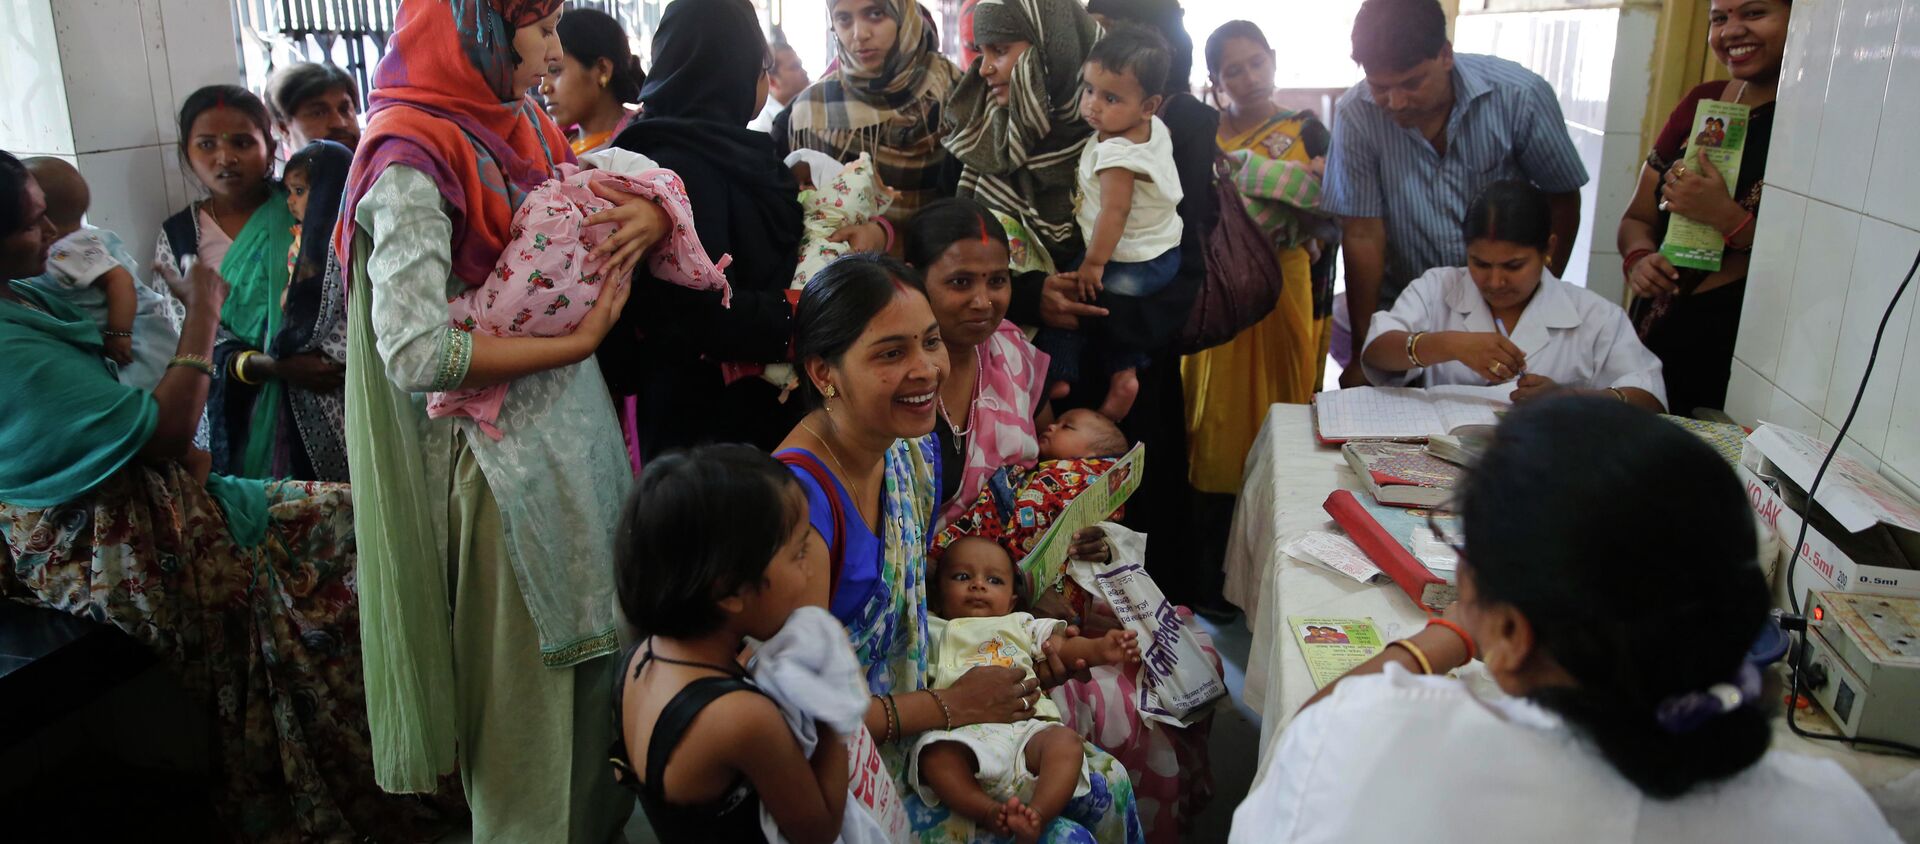 Indian women wait to get their infants immunized as part of  an immunization drive at a government hospital in Allahabad, India. - Sputnik International, 1920, 31.08.2015